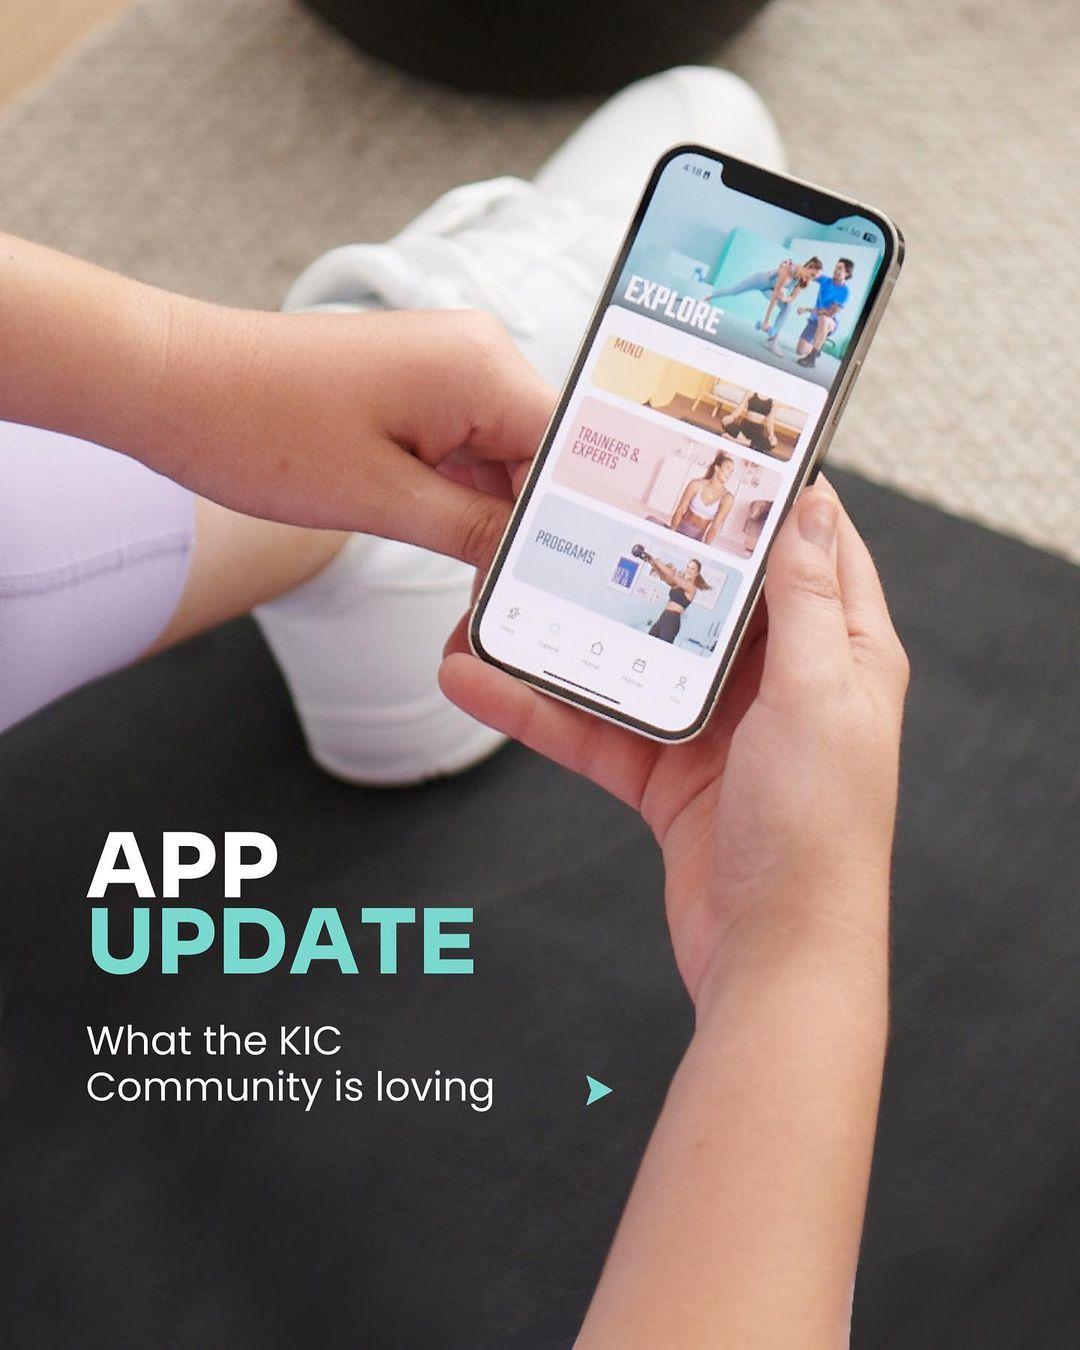 class="content__text"
 Swipe to read what the KIC community are loving about our brand new app update! 

New additions to the KIC app that will help you find your personal recipe for success in 2023:

🔎 New Filters
📲 New Functionalities 
💪 New programs 

Ready to KIC’ it? Head to the link in our bio to get started today! 
 